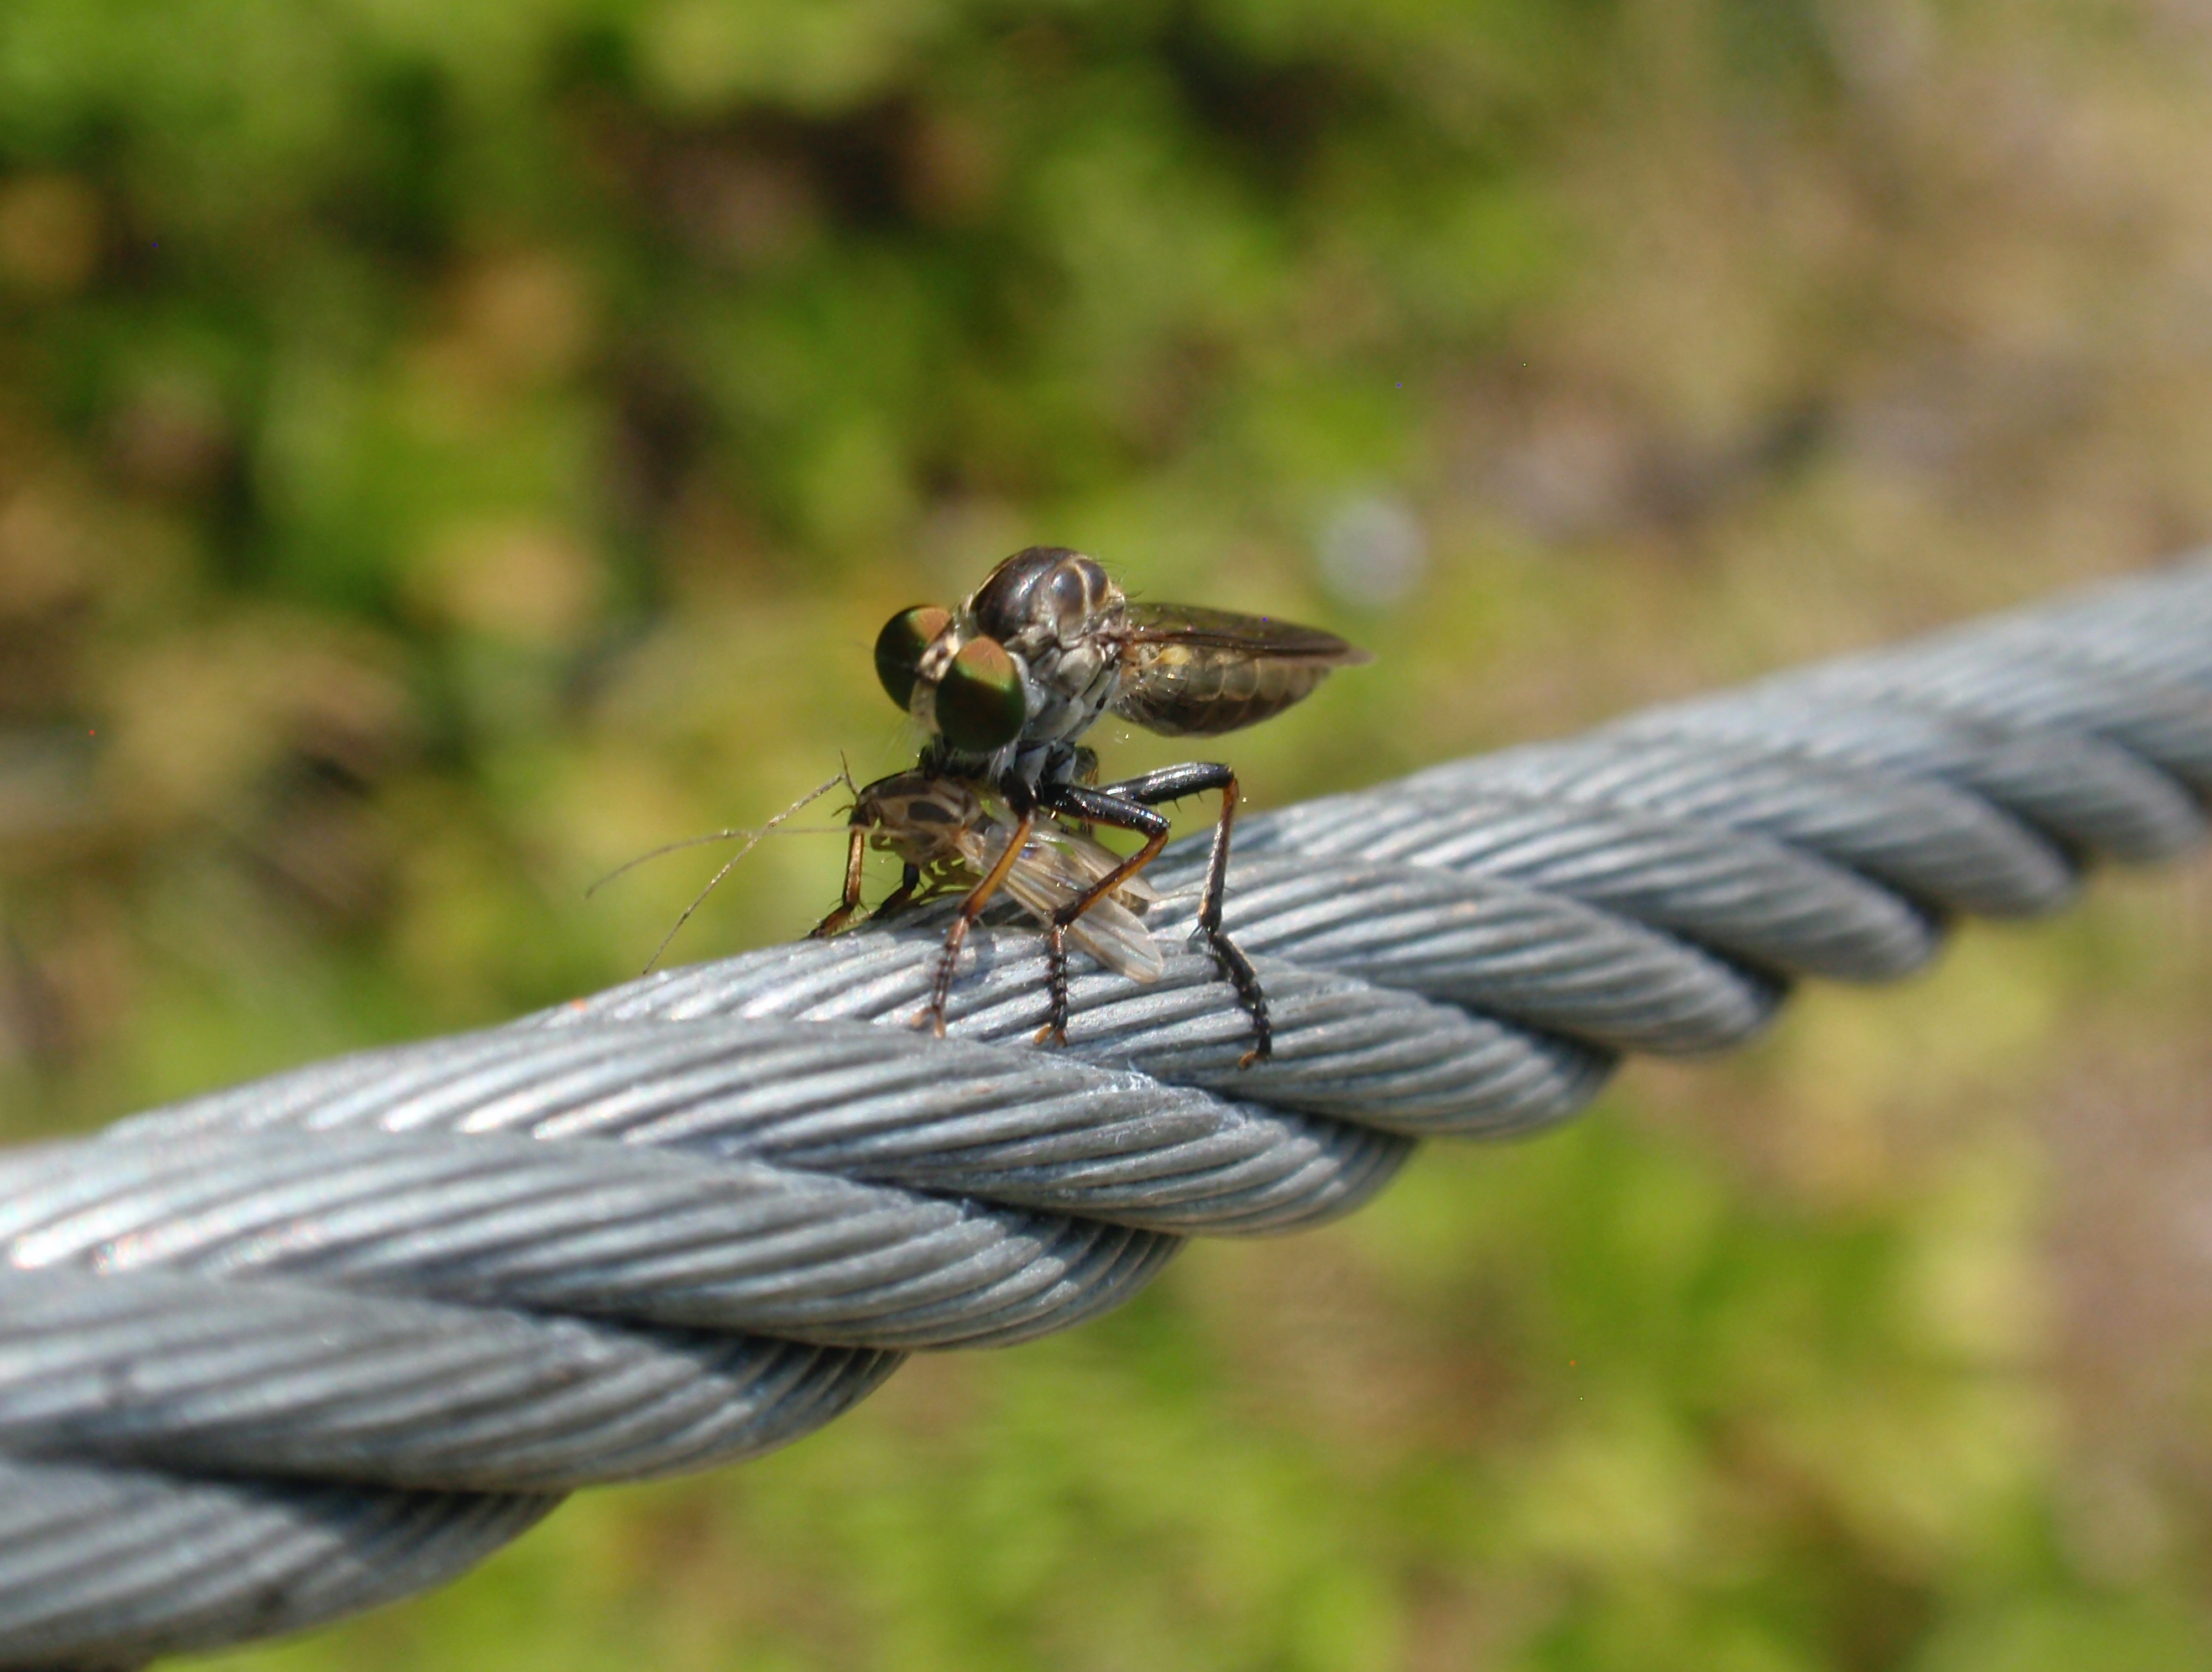 A robber fly resting on a steel cable.